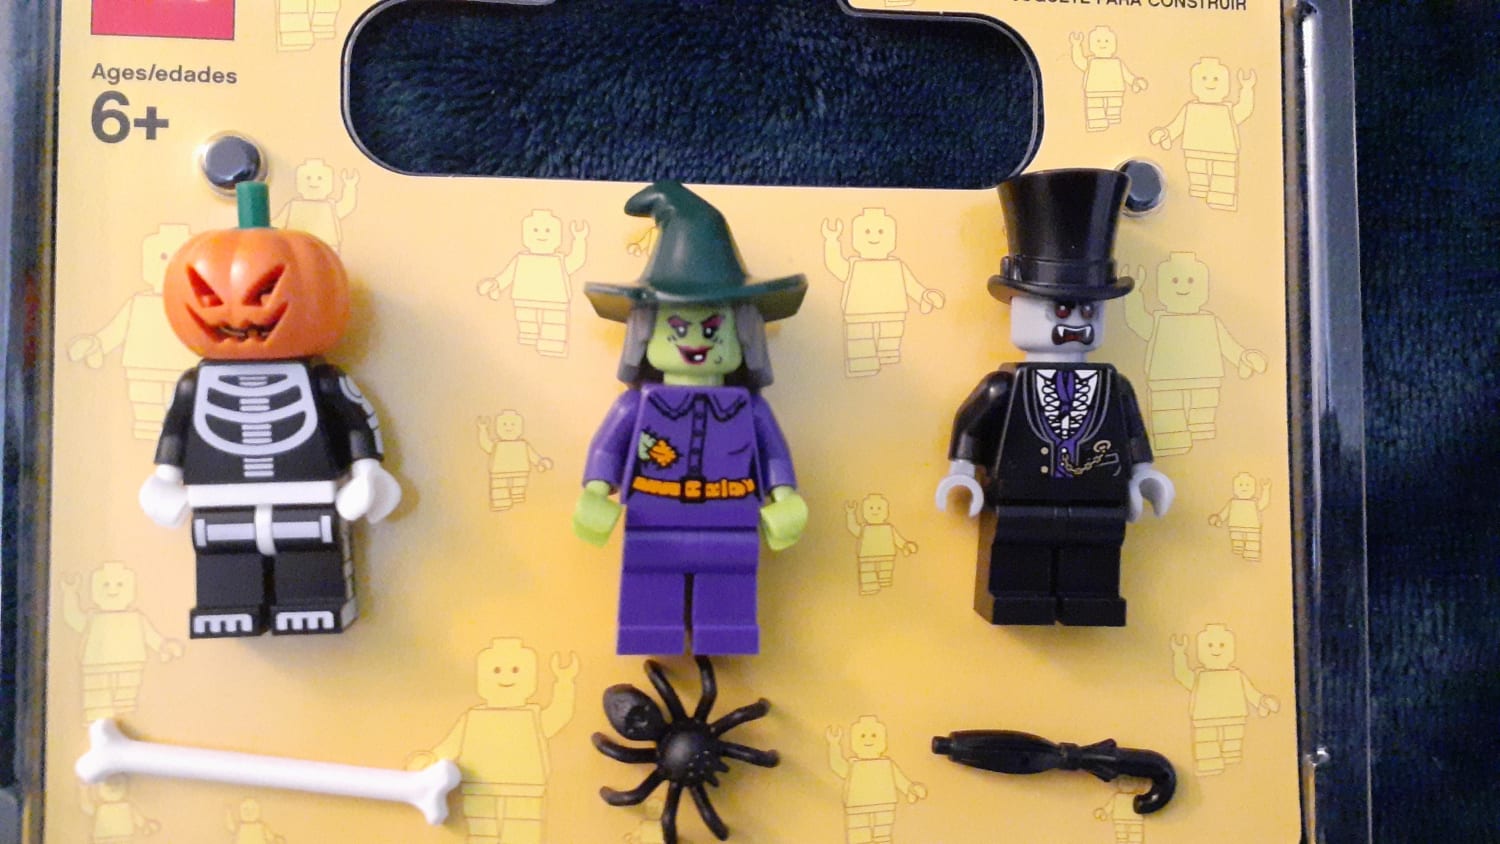 Went to my local lego store and they had Halloween stuff in thebuild your own minifigure bin !!!